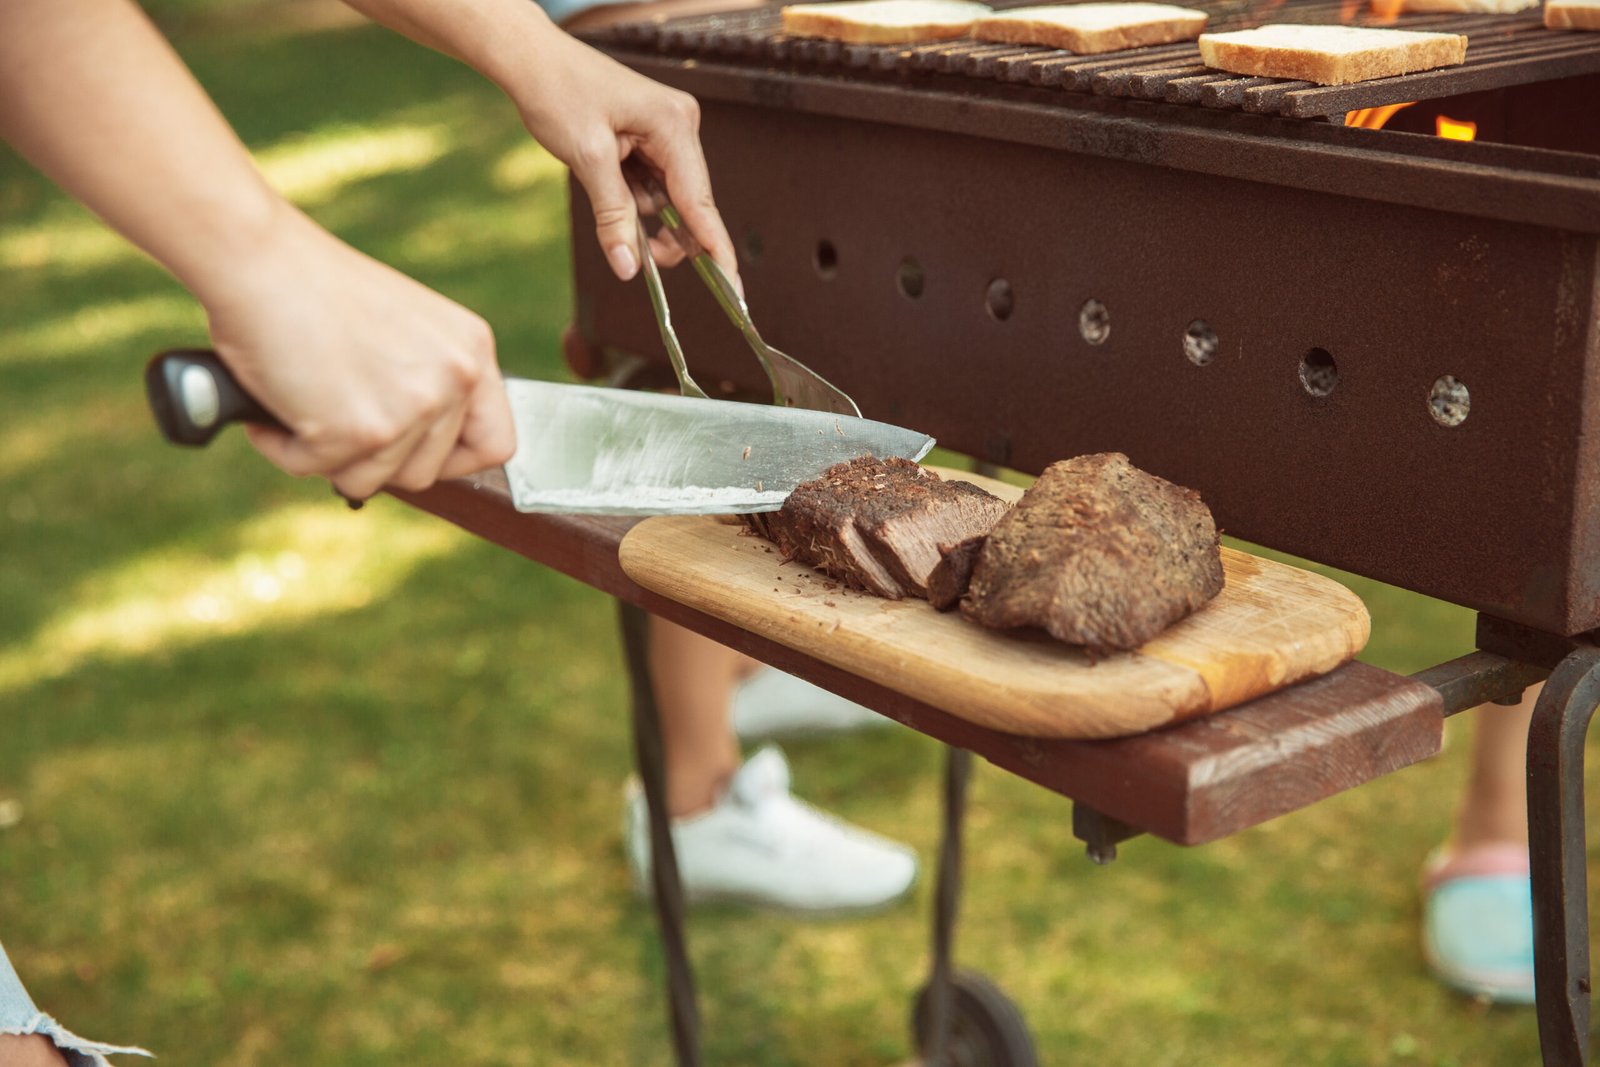 How To Choose The Right Barbecue Accessories For Your Grilling Style